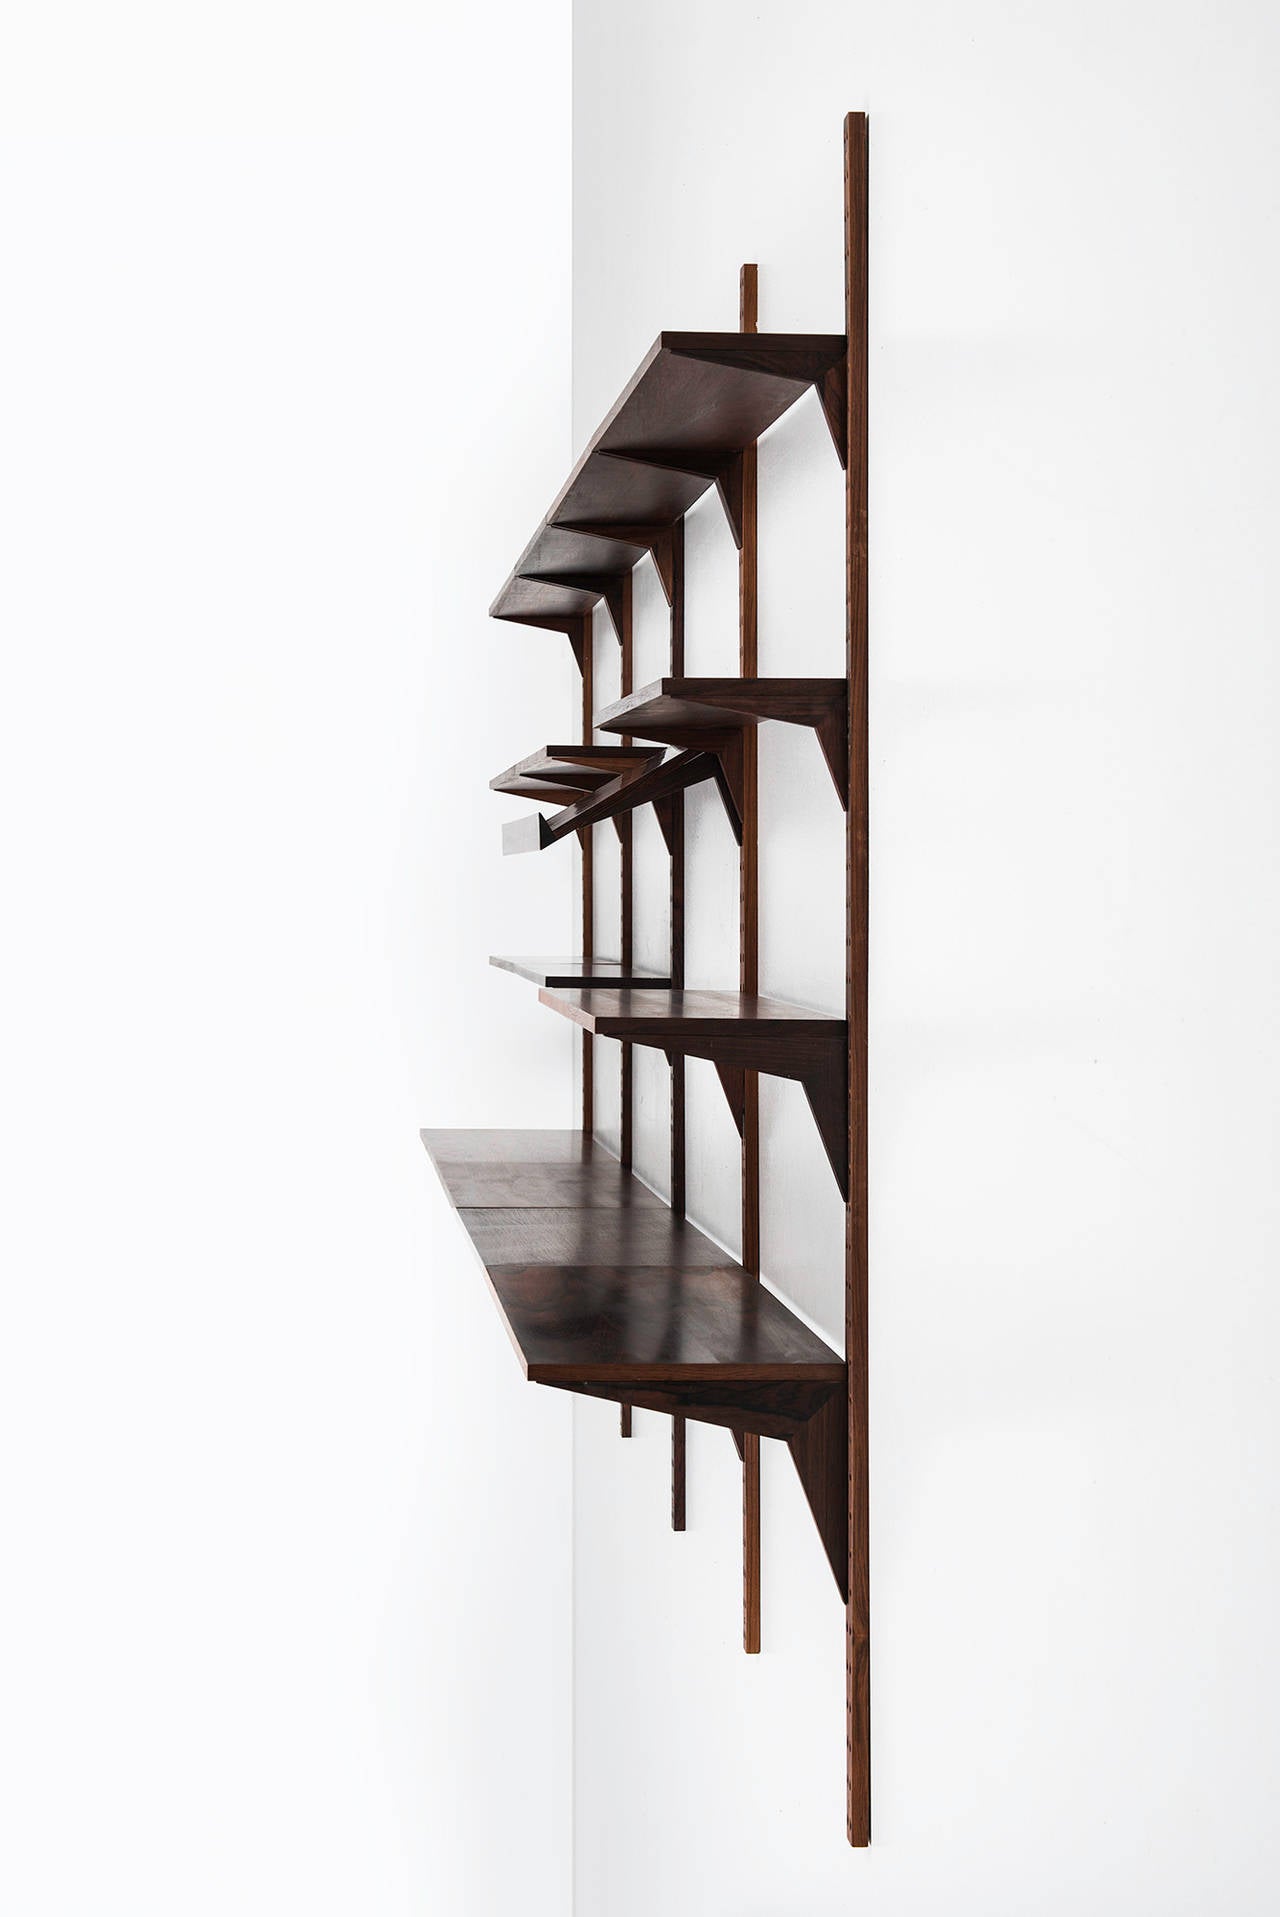 ‘Cado’ wall system/bookcase designed by Poul Cadovius. Produced in Denmark.